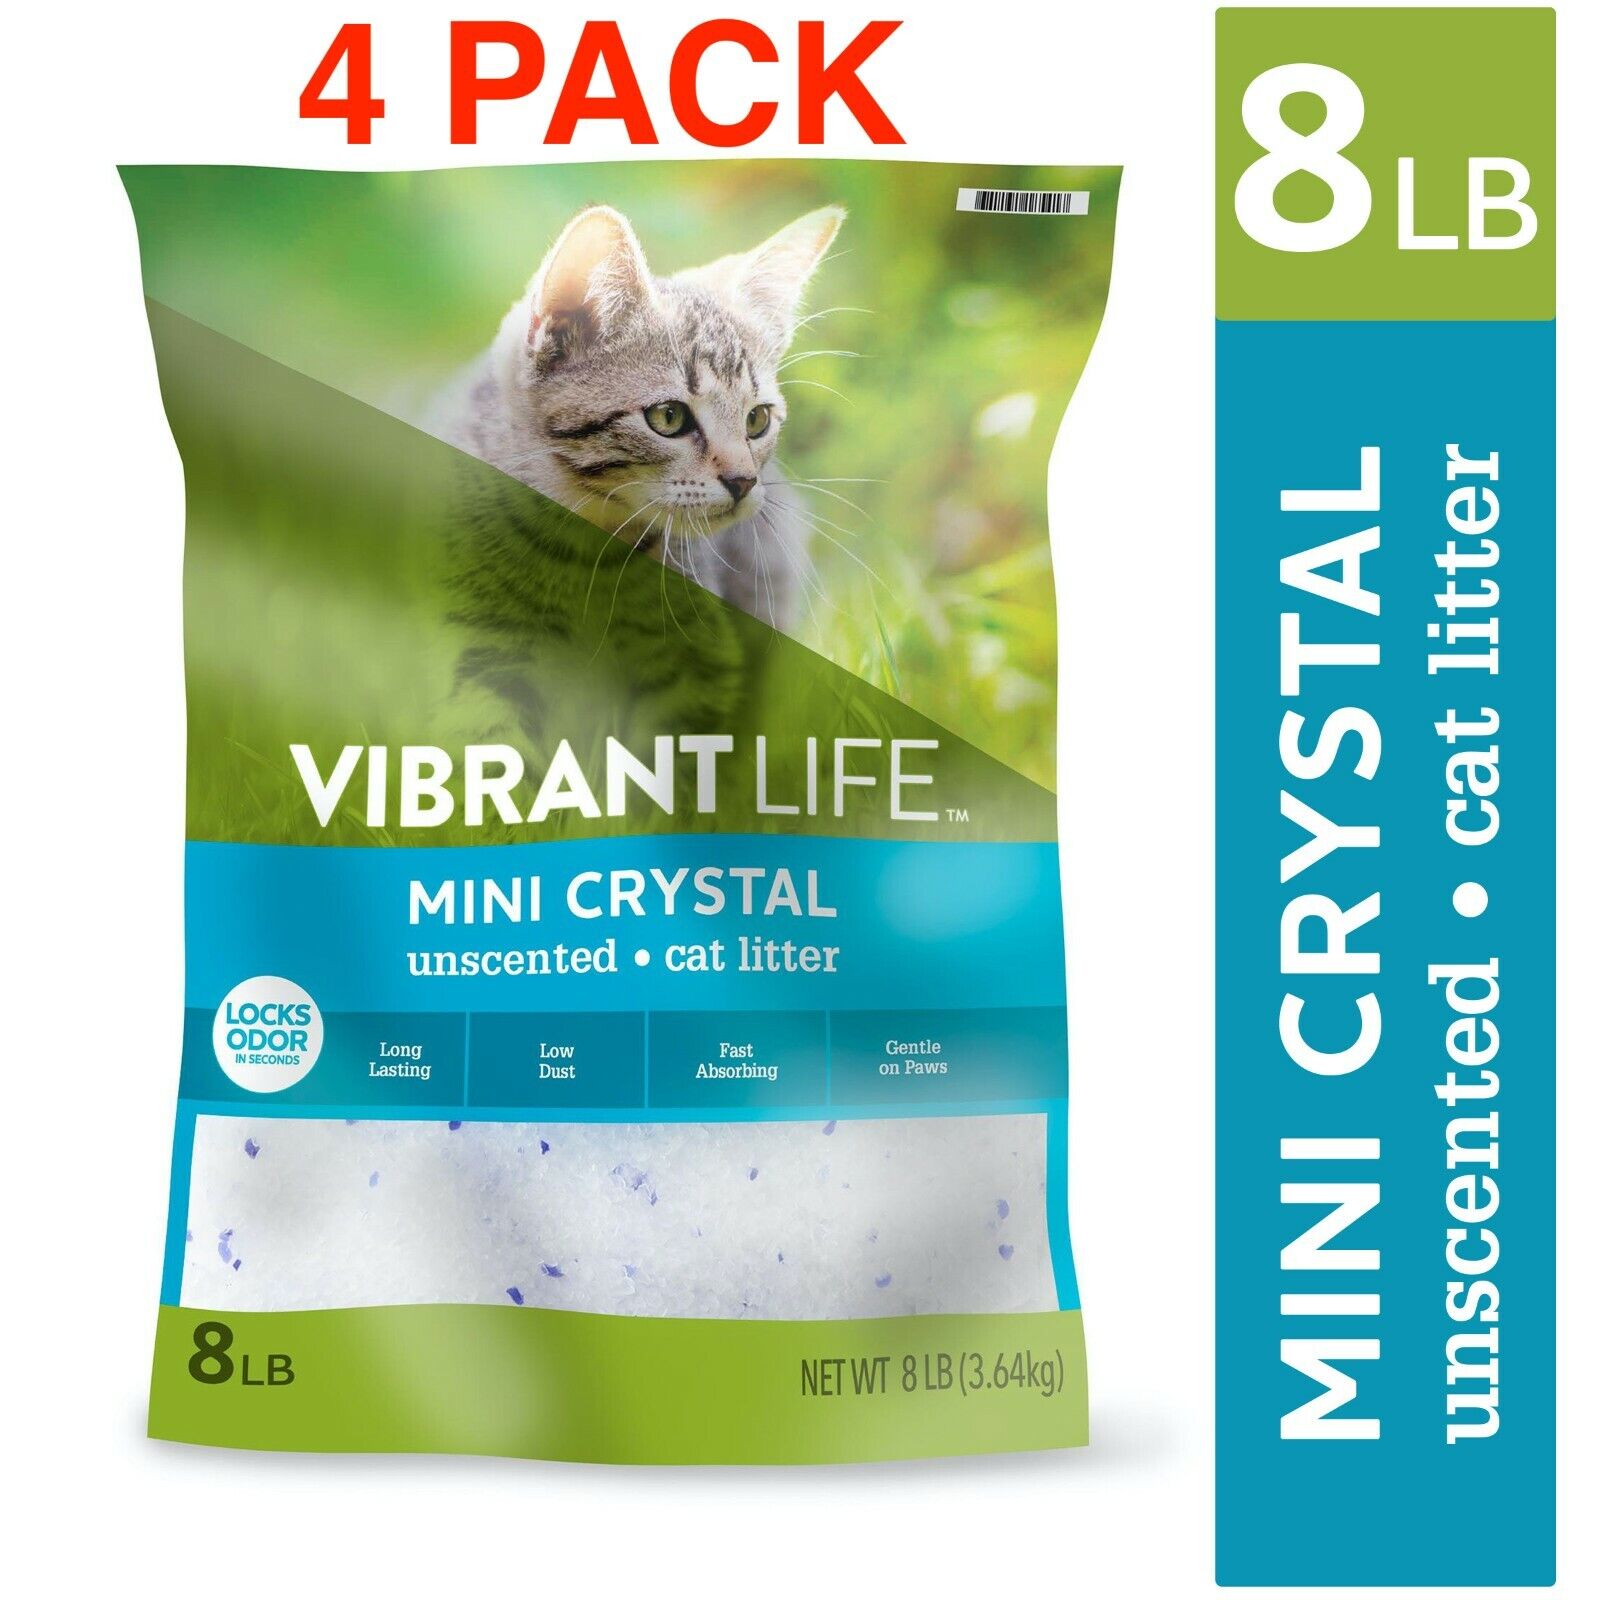 4 PACK Mini Crystal Unscented Cat Litter, 32 lbs Total